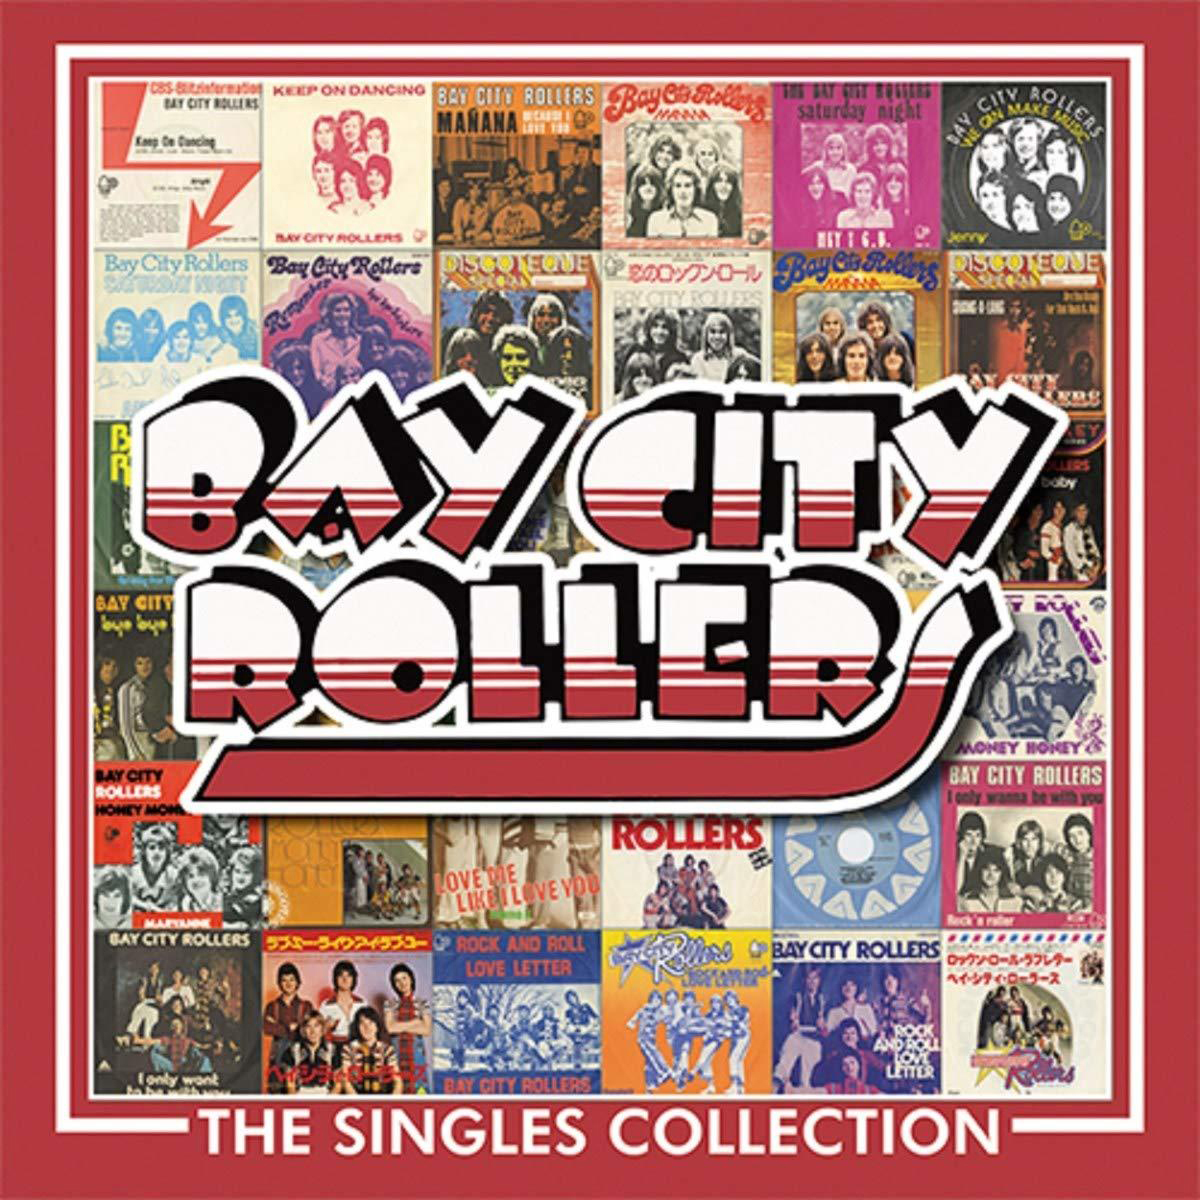 Rollers Collection (CD) - Singles Box City Set) (3CD The Bay -